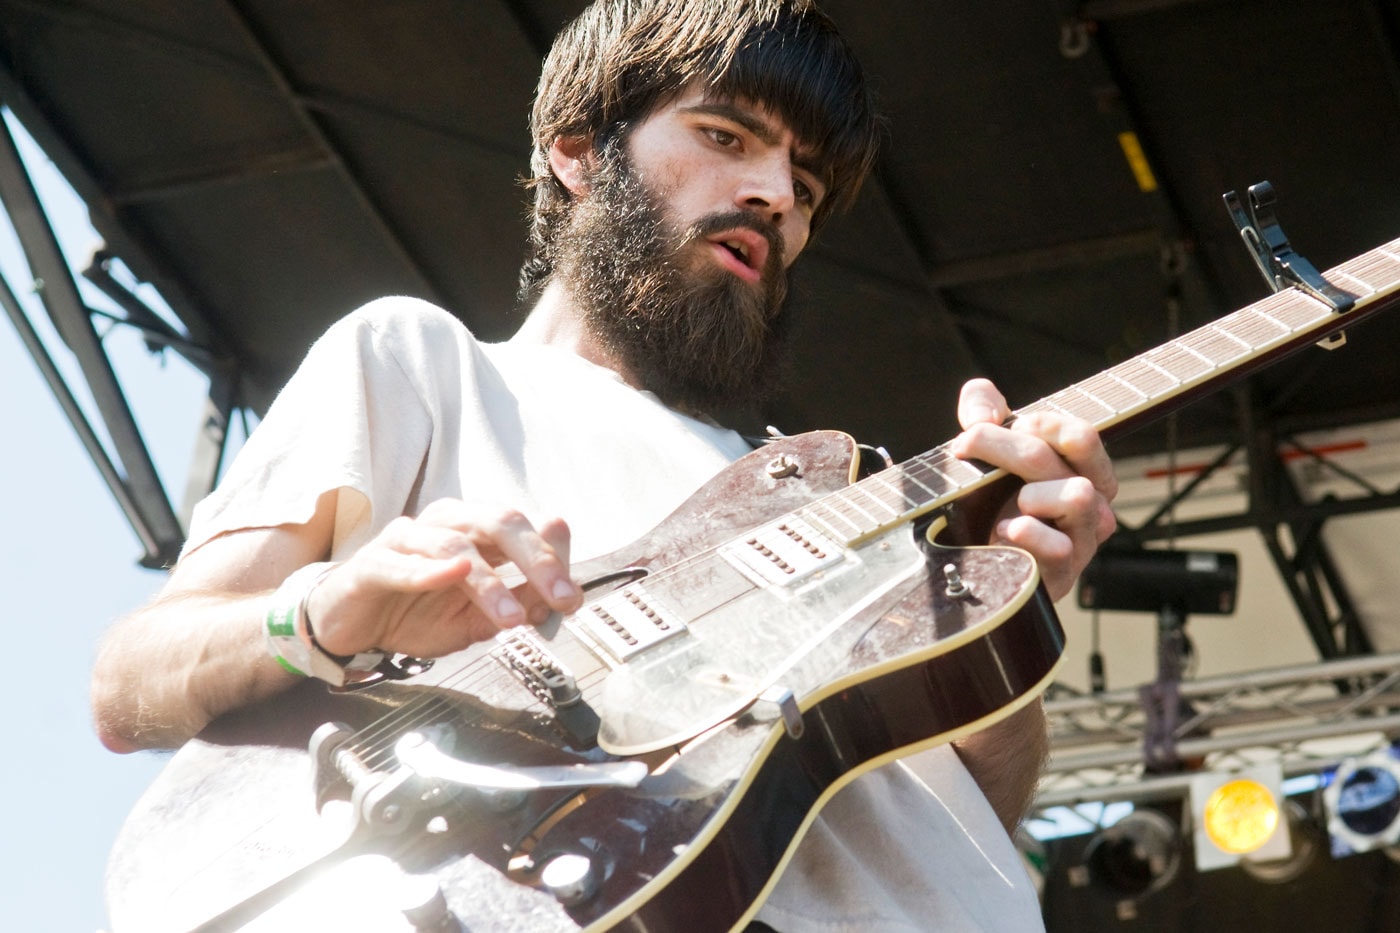 Listen to Titus Andronicus' Rock Cover of The Weeknd's "The Hills"